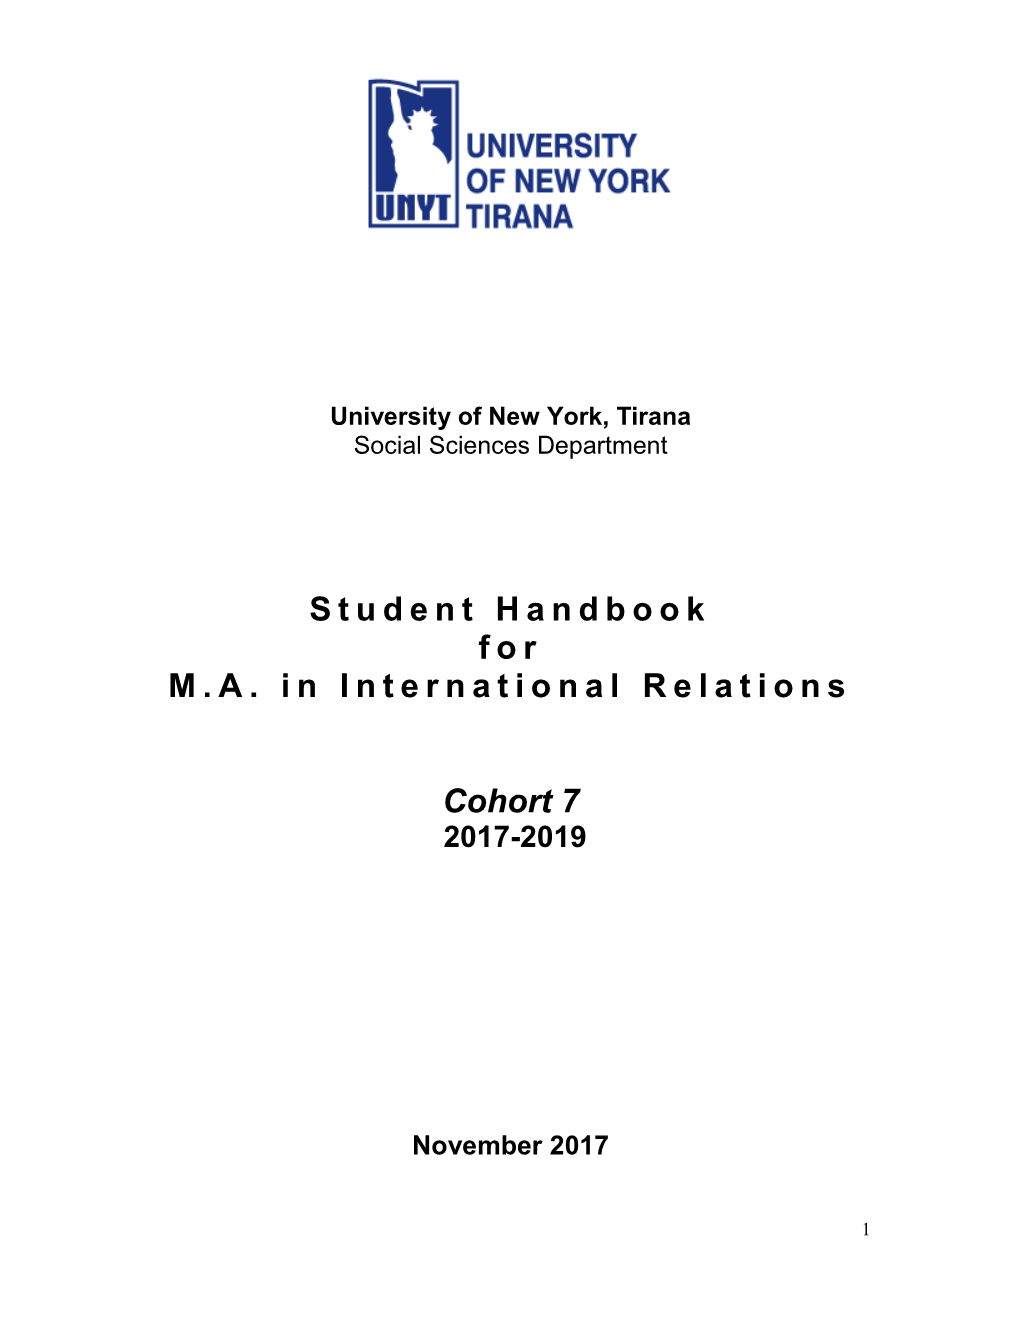 Student Handbook for M.A. in International Relations Cohort 7